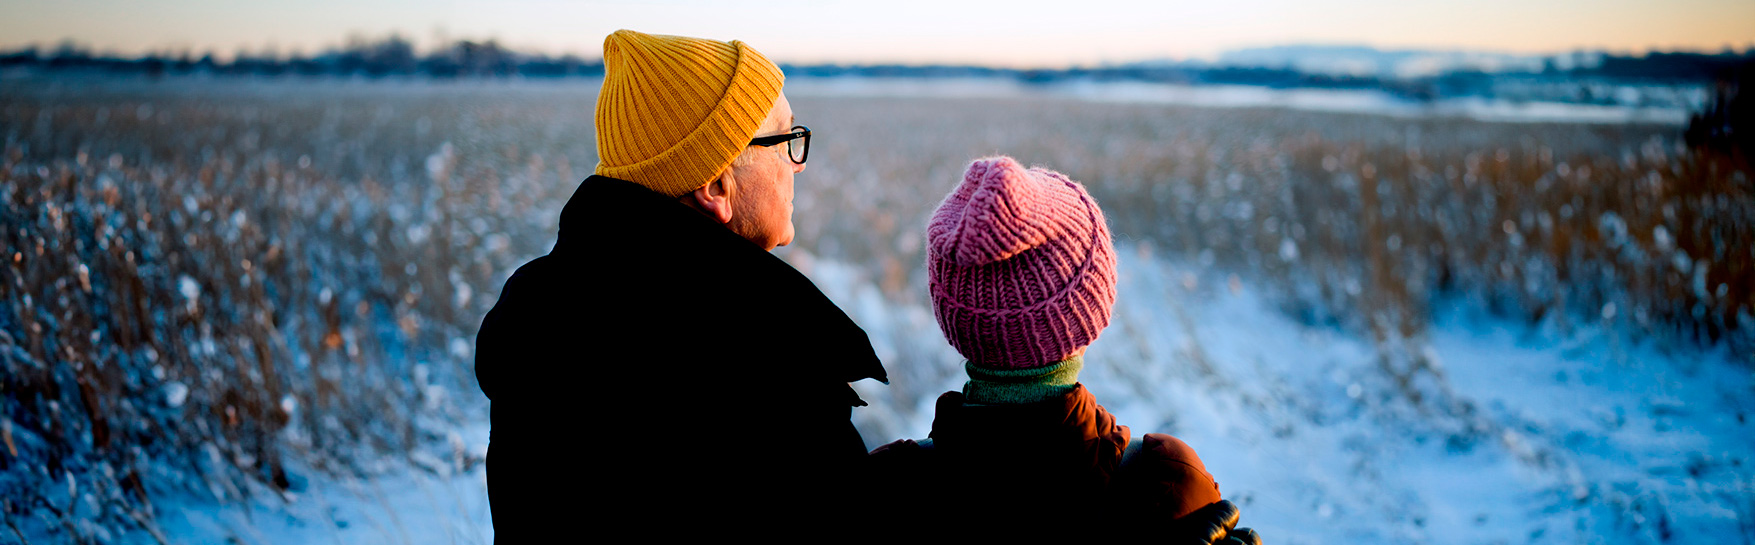 Two people are standing in a snowy field.